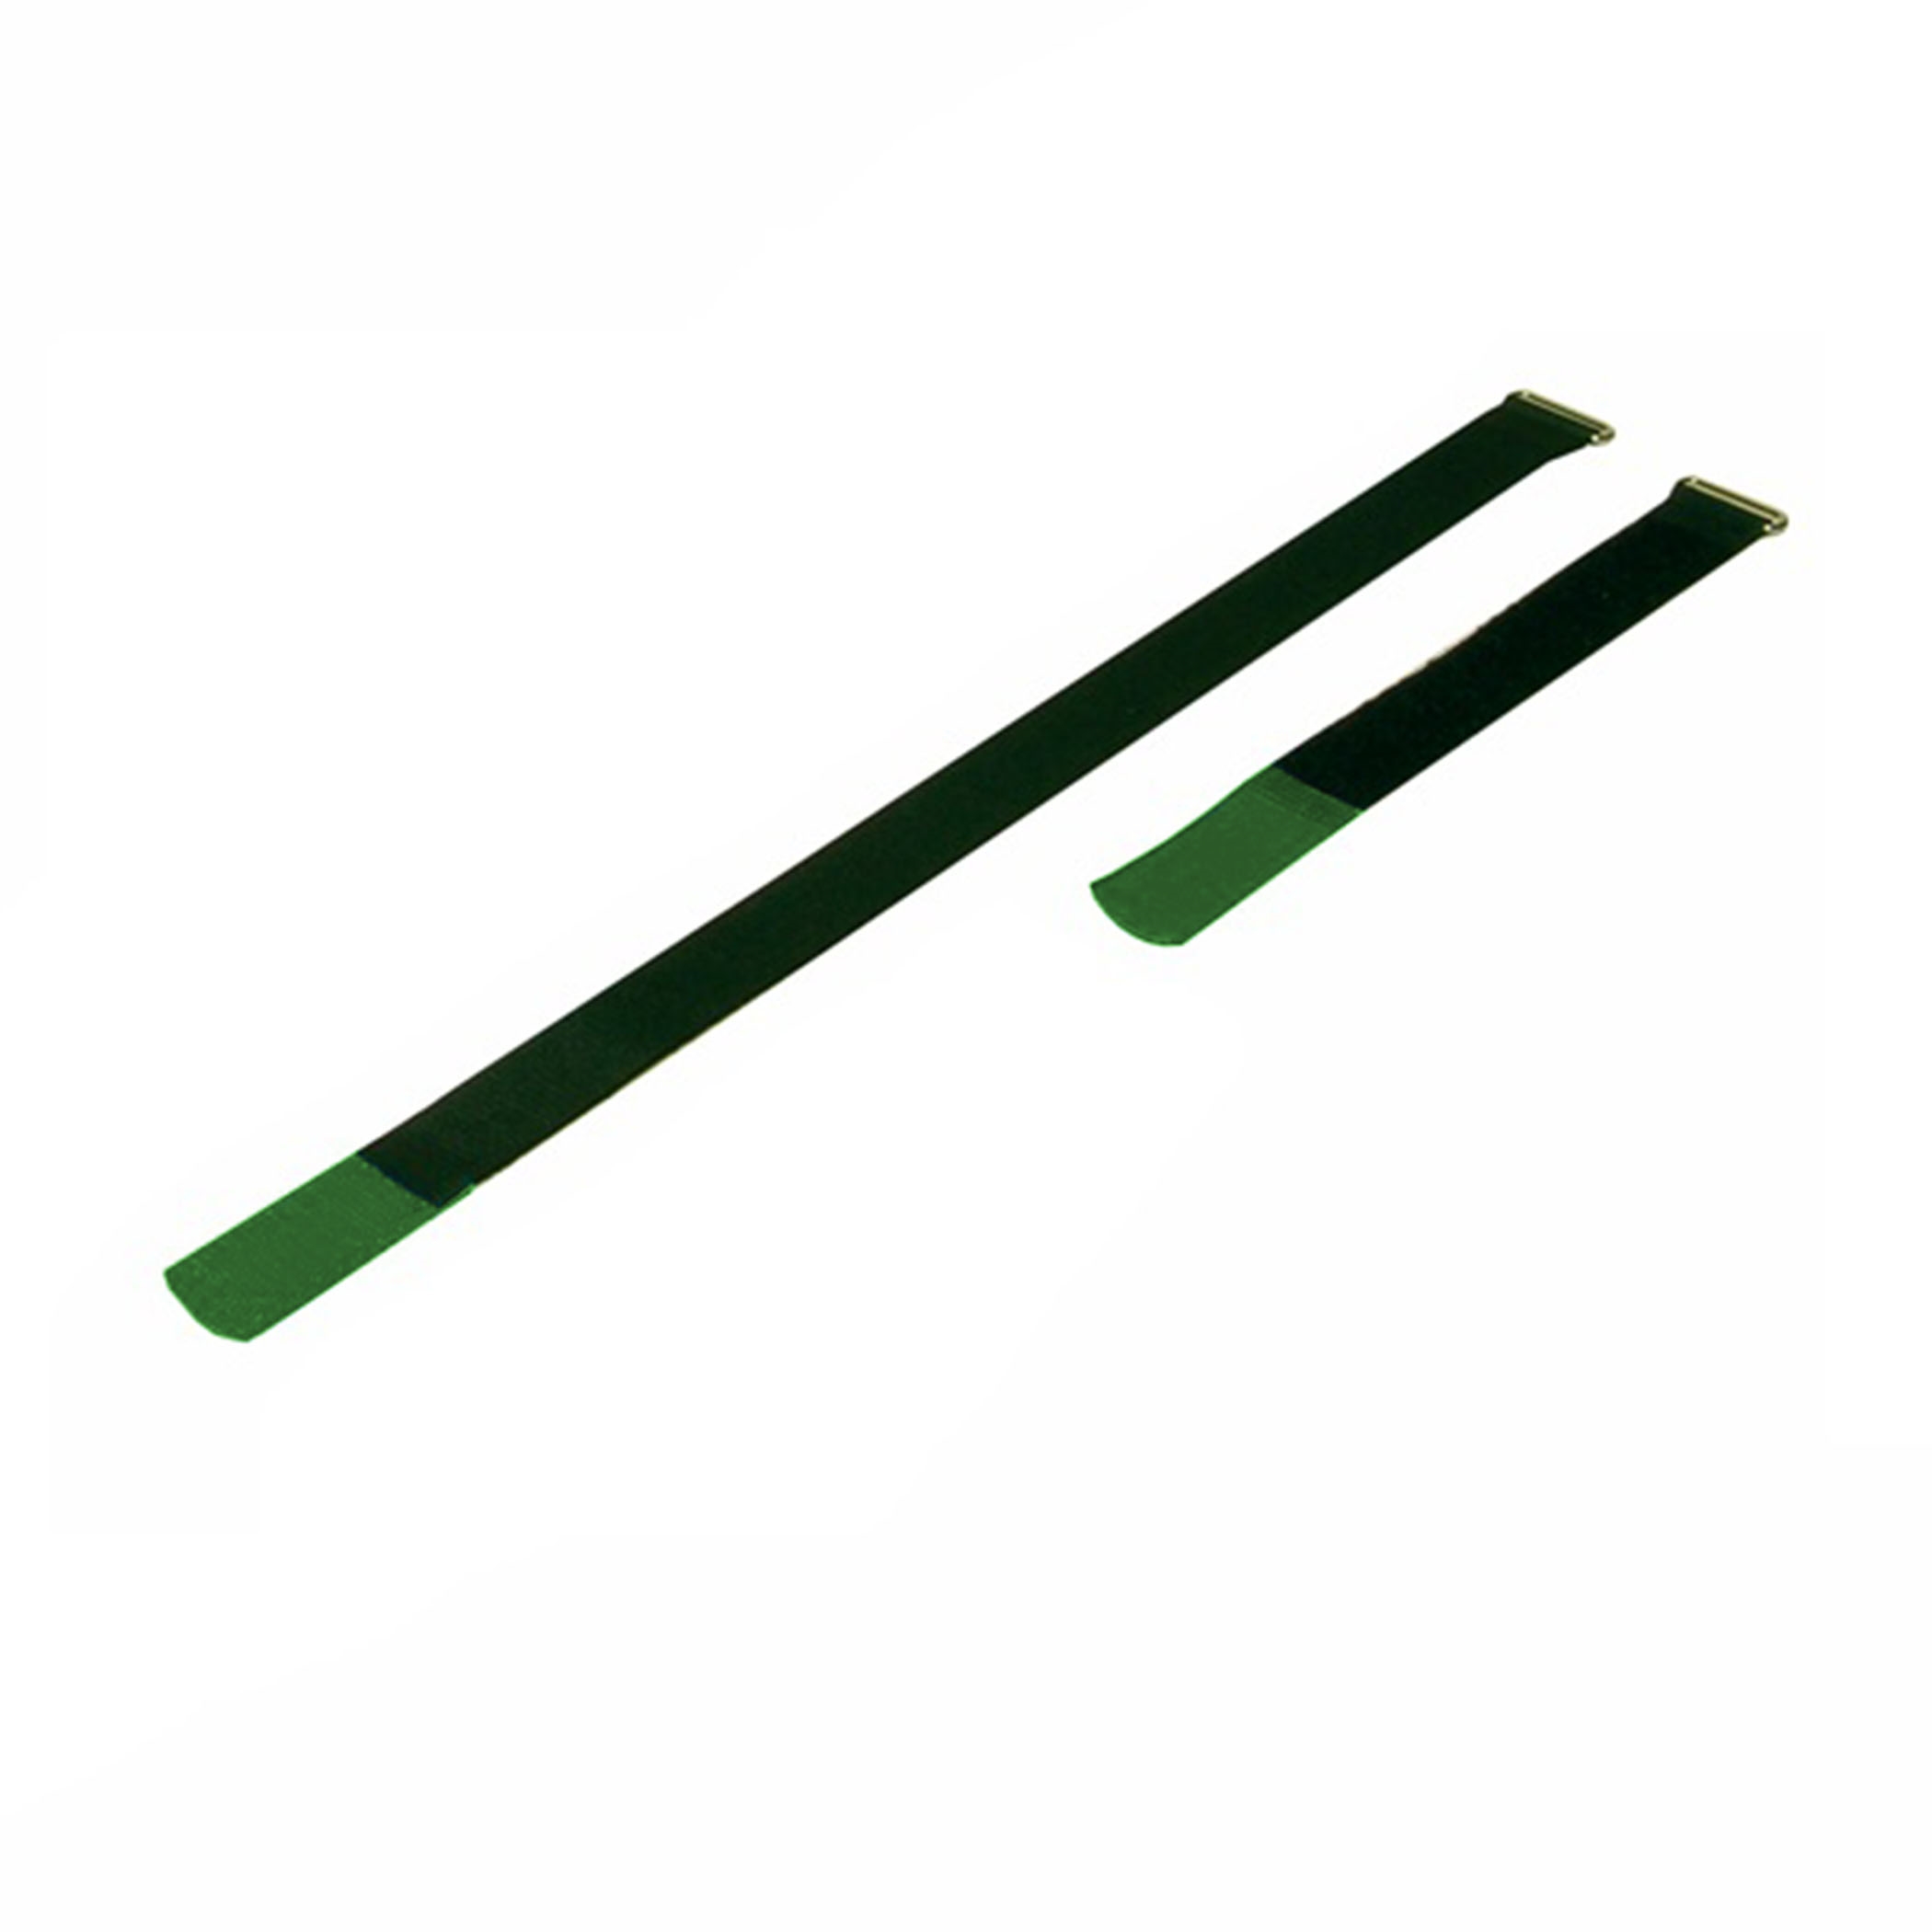 Cable Tie 410x25mm with Hook Green, (10 pieces) - a2541-820h